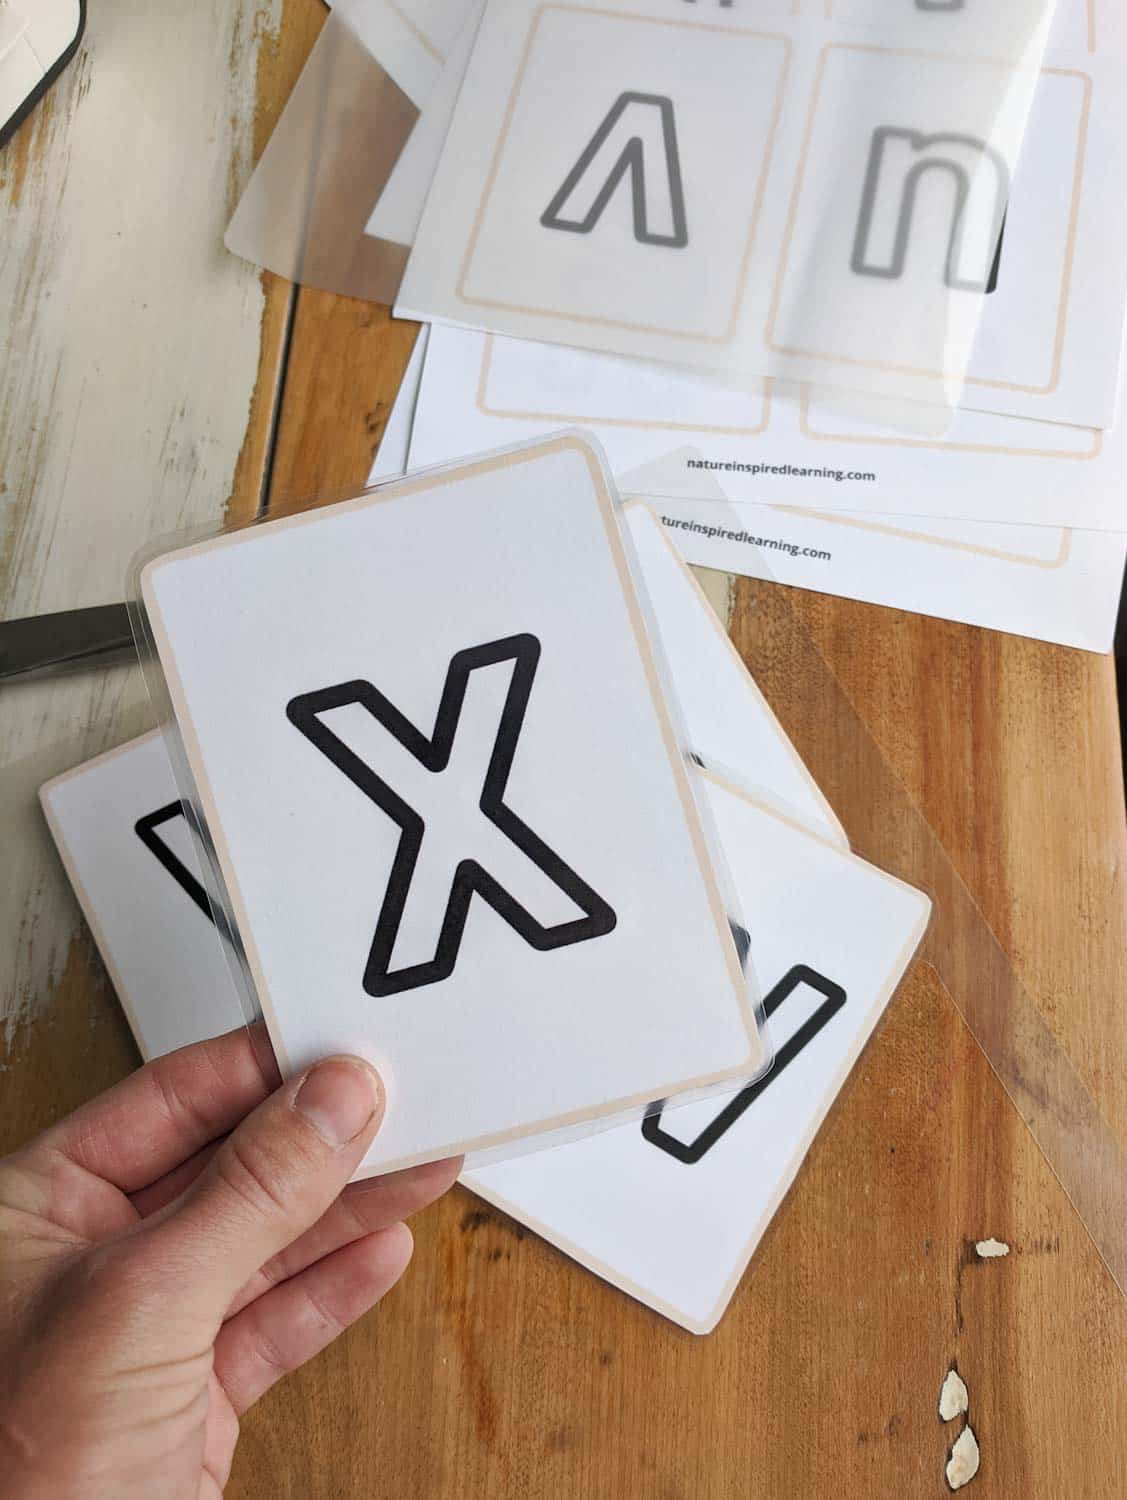 hand holding a laminated lowercase letter x flashcard over cut out cards on a wooden table. Plastic laminating sheet on top of a pile of printed out cards.